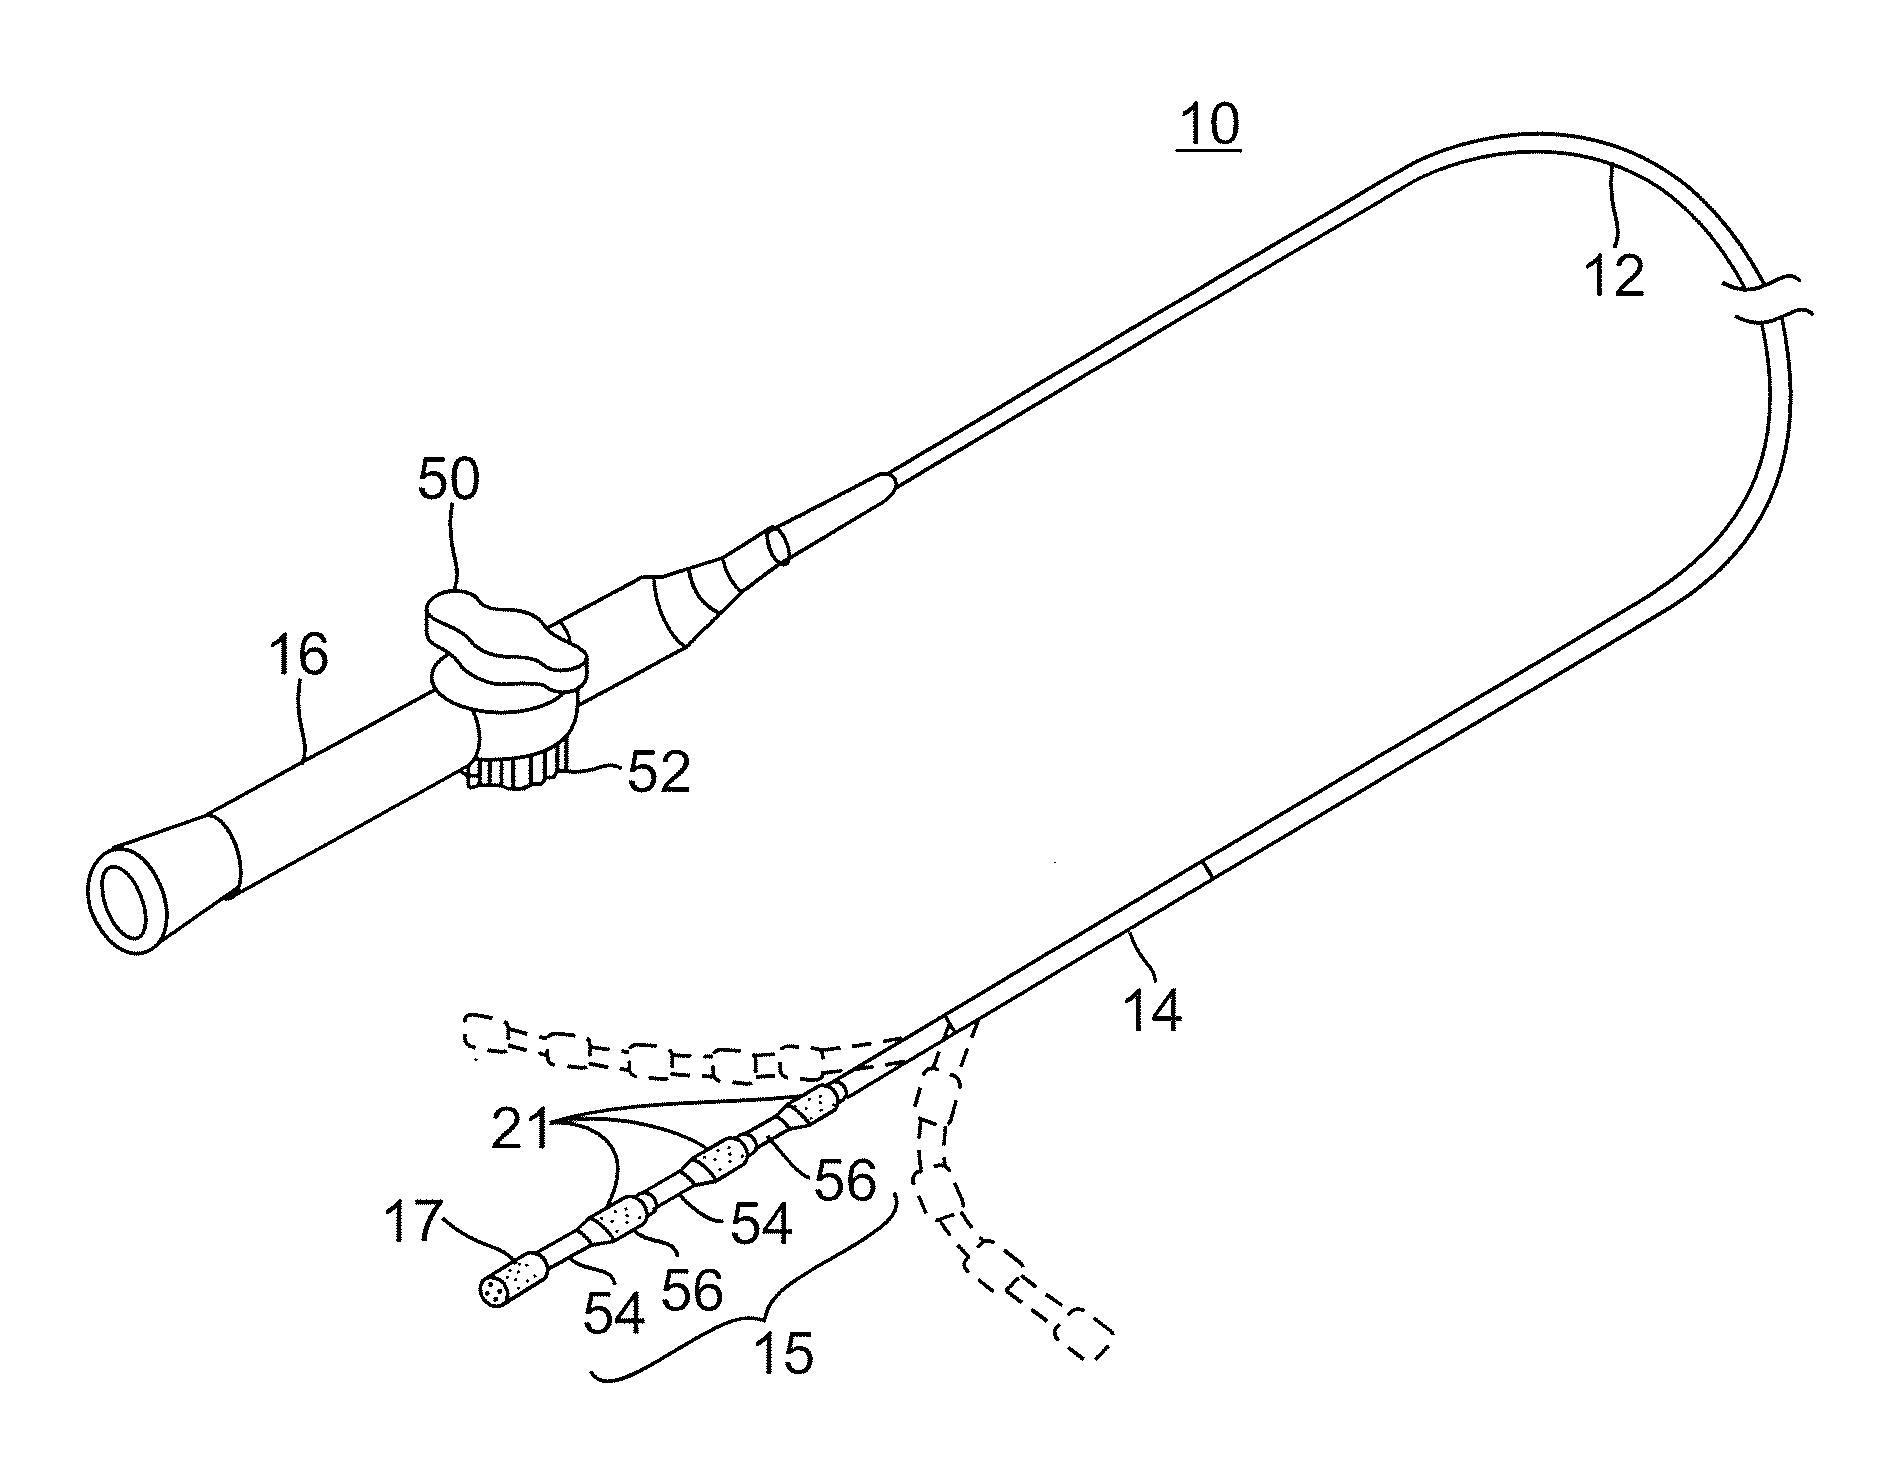 Catheter with composite construction